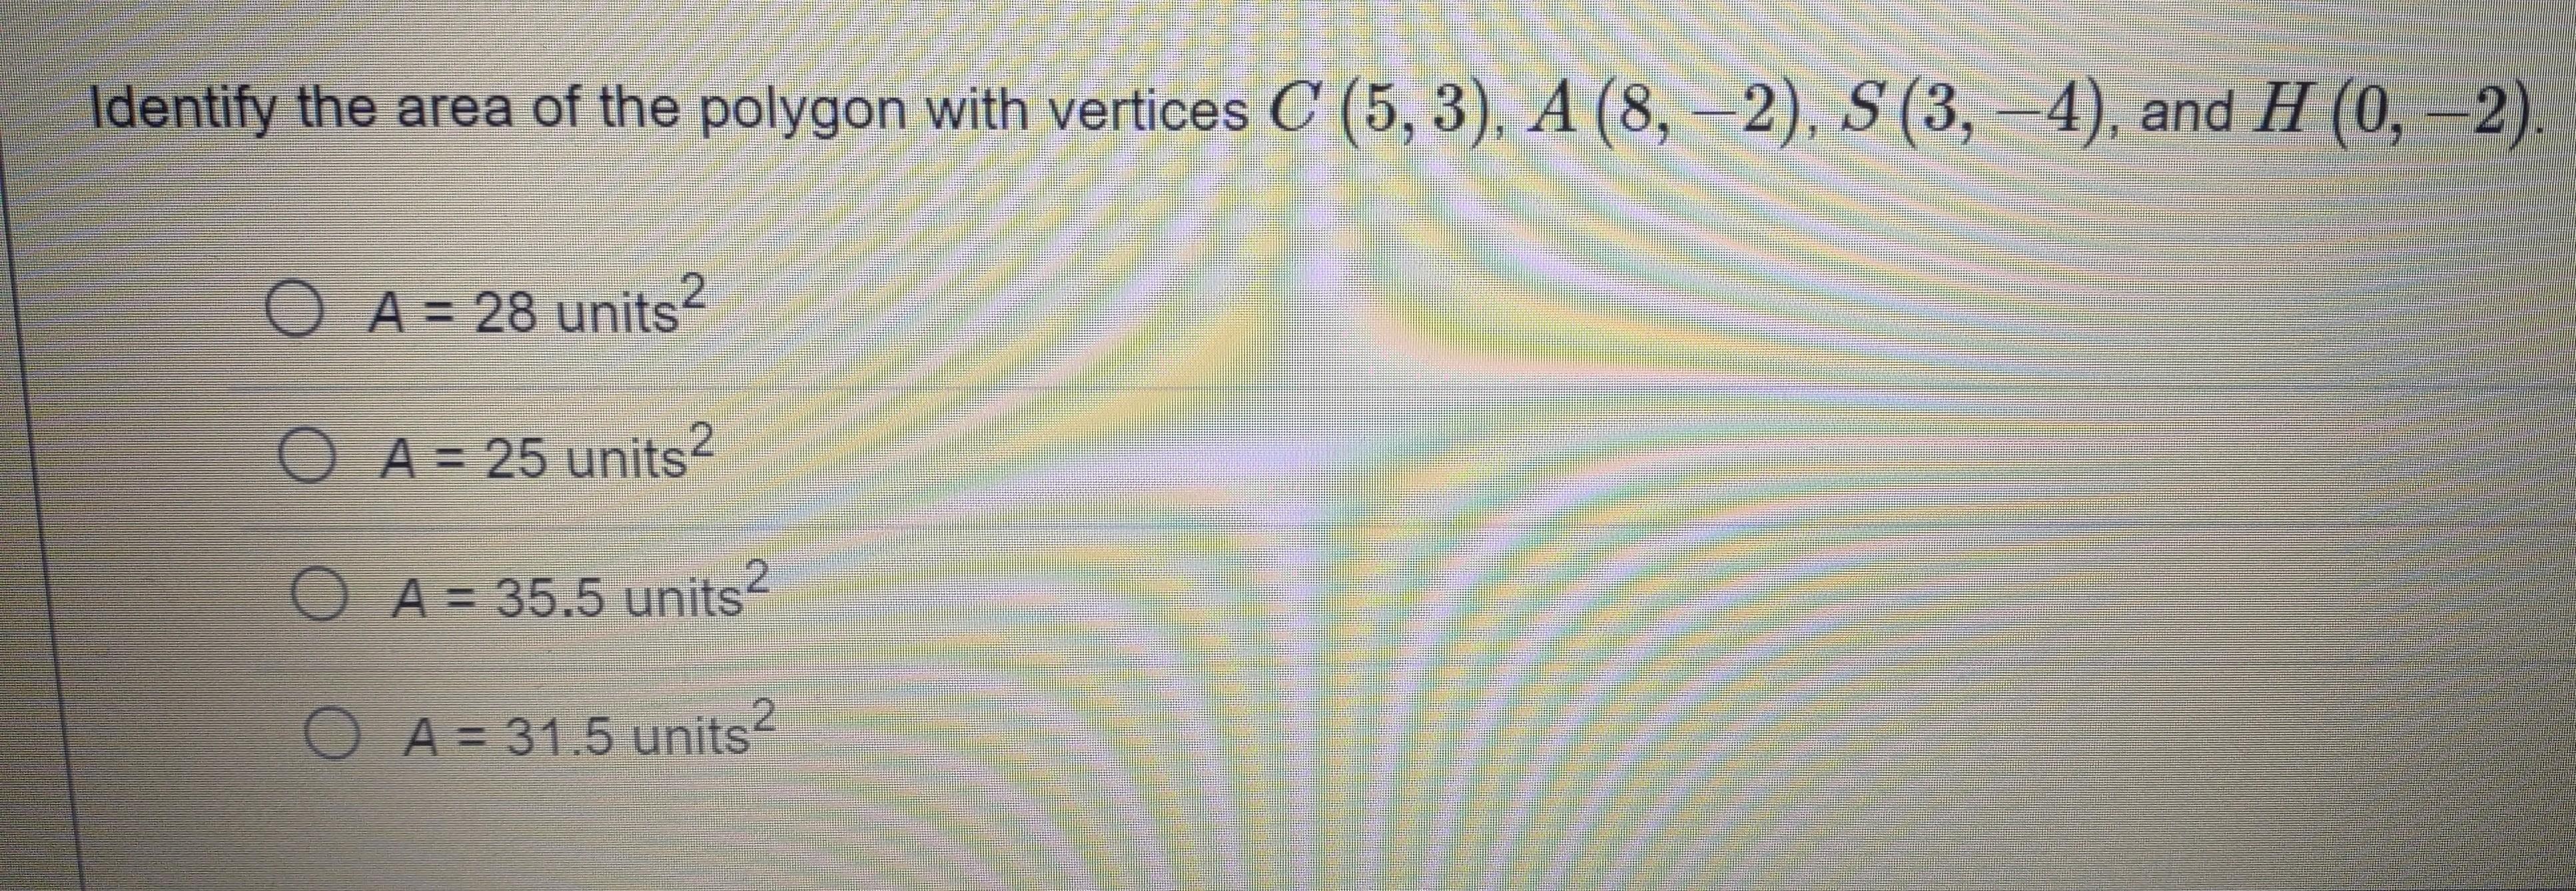 Identify The Area Of The Polygon With Vertices C (5, 3), A (8, -2), S (3, -4), And H (0, -2).Please Help.